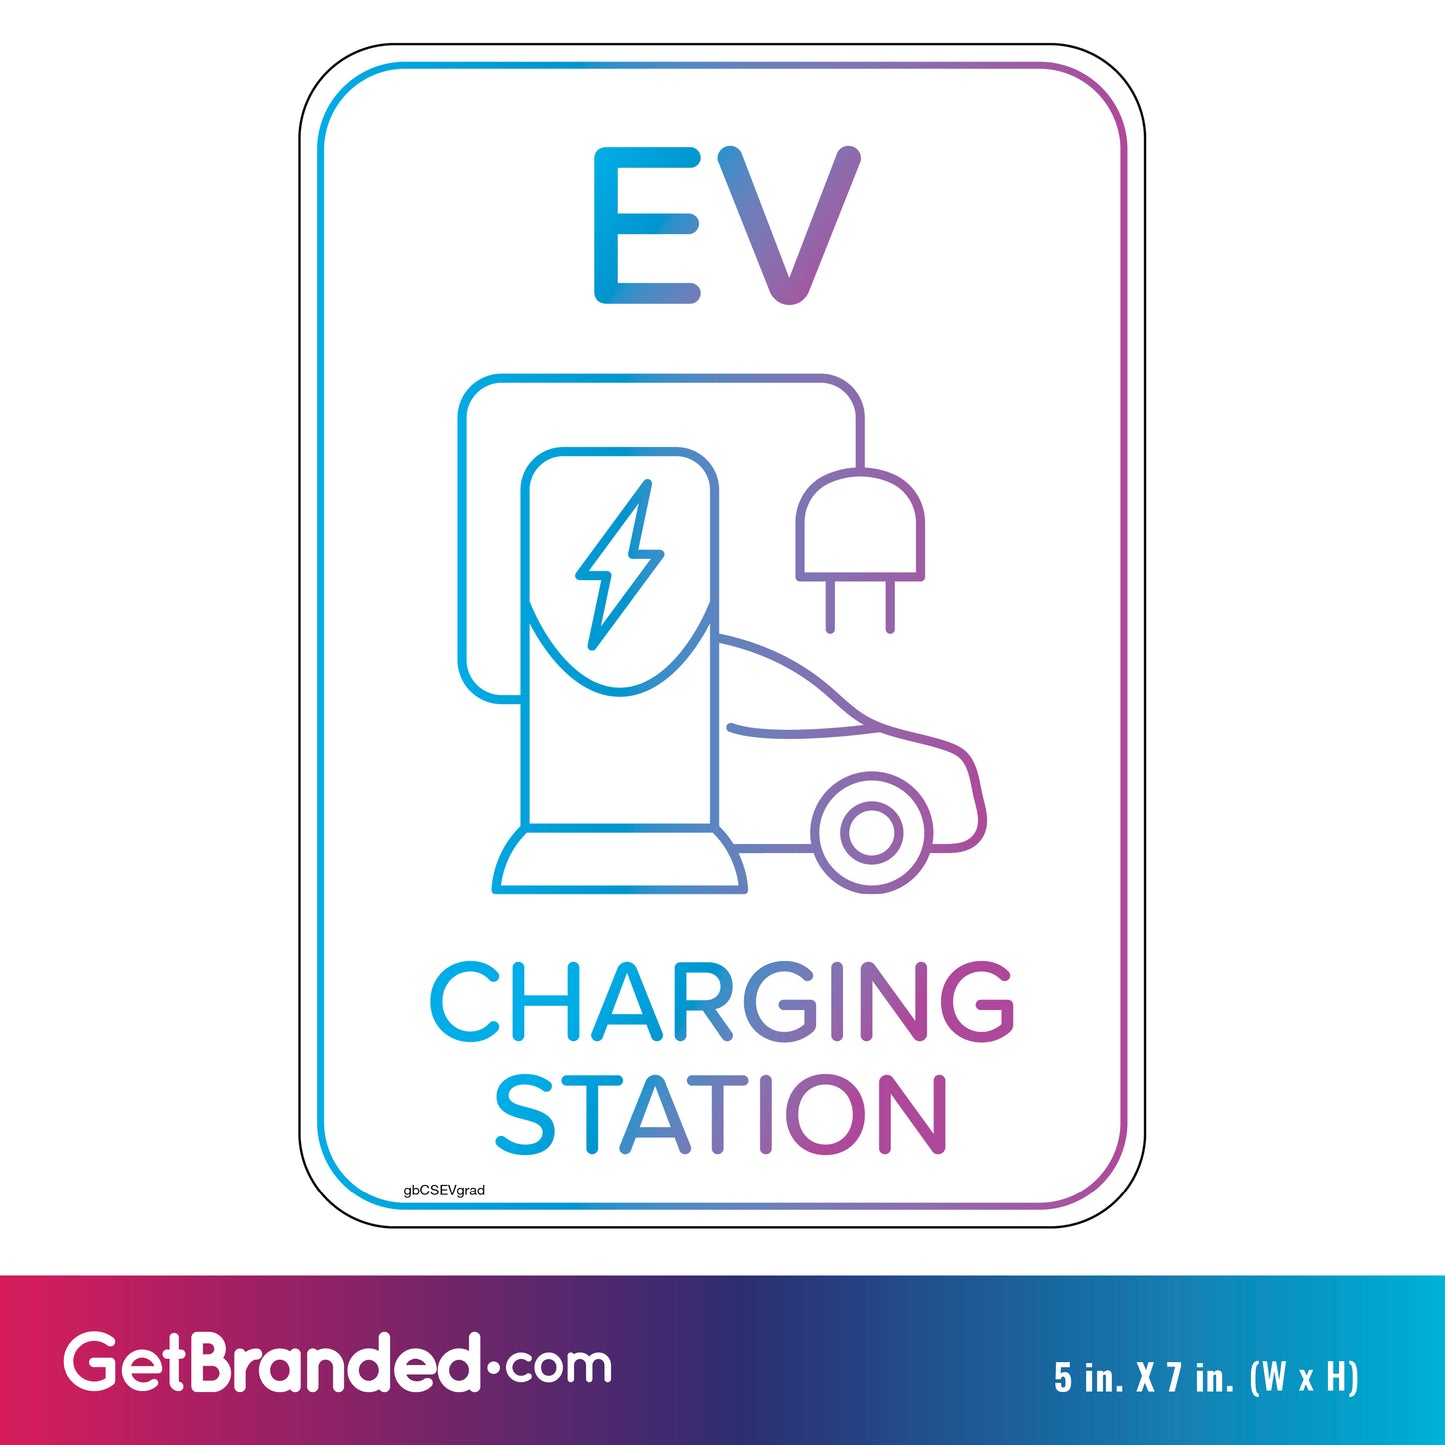 Electric Vehicle Charging Station Decal: A bold and durable design featuring bright colors and made of SharkSkin® material. Measures 5 inches by 7 inches, ideal for outdoor use. Promote clean energy and improve the visibility of your charging station with this easy-to-install decal. Measurement indicator